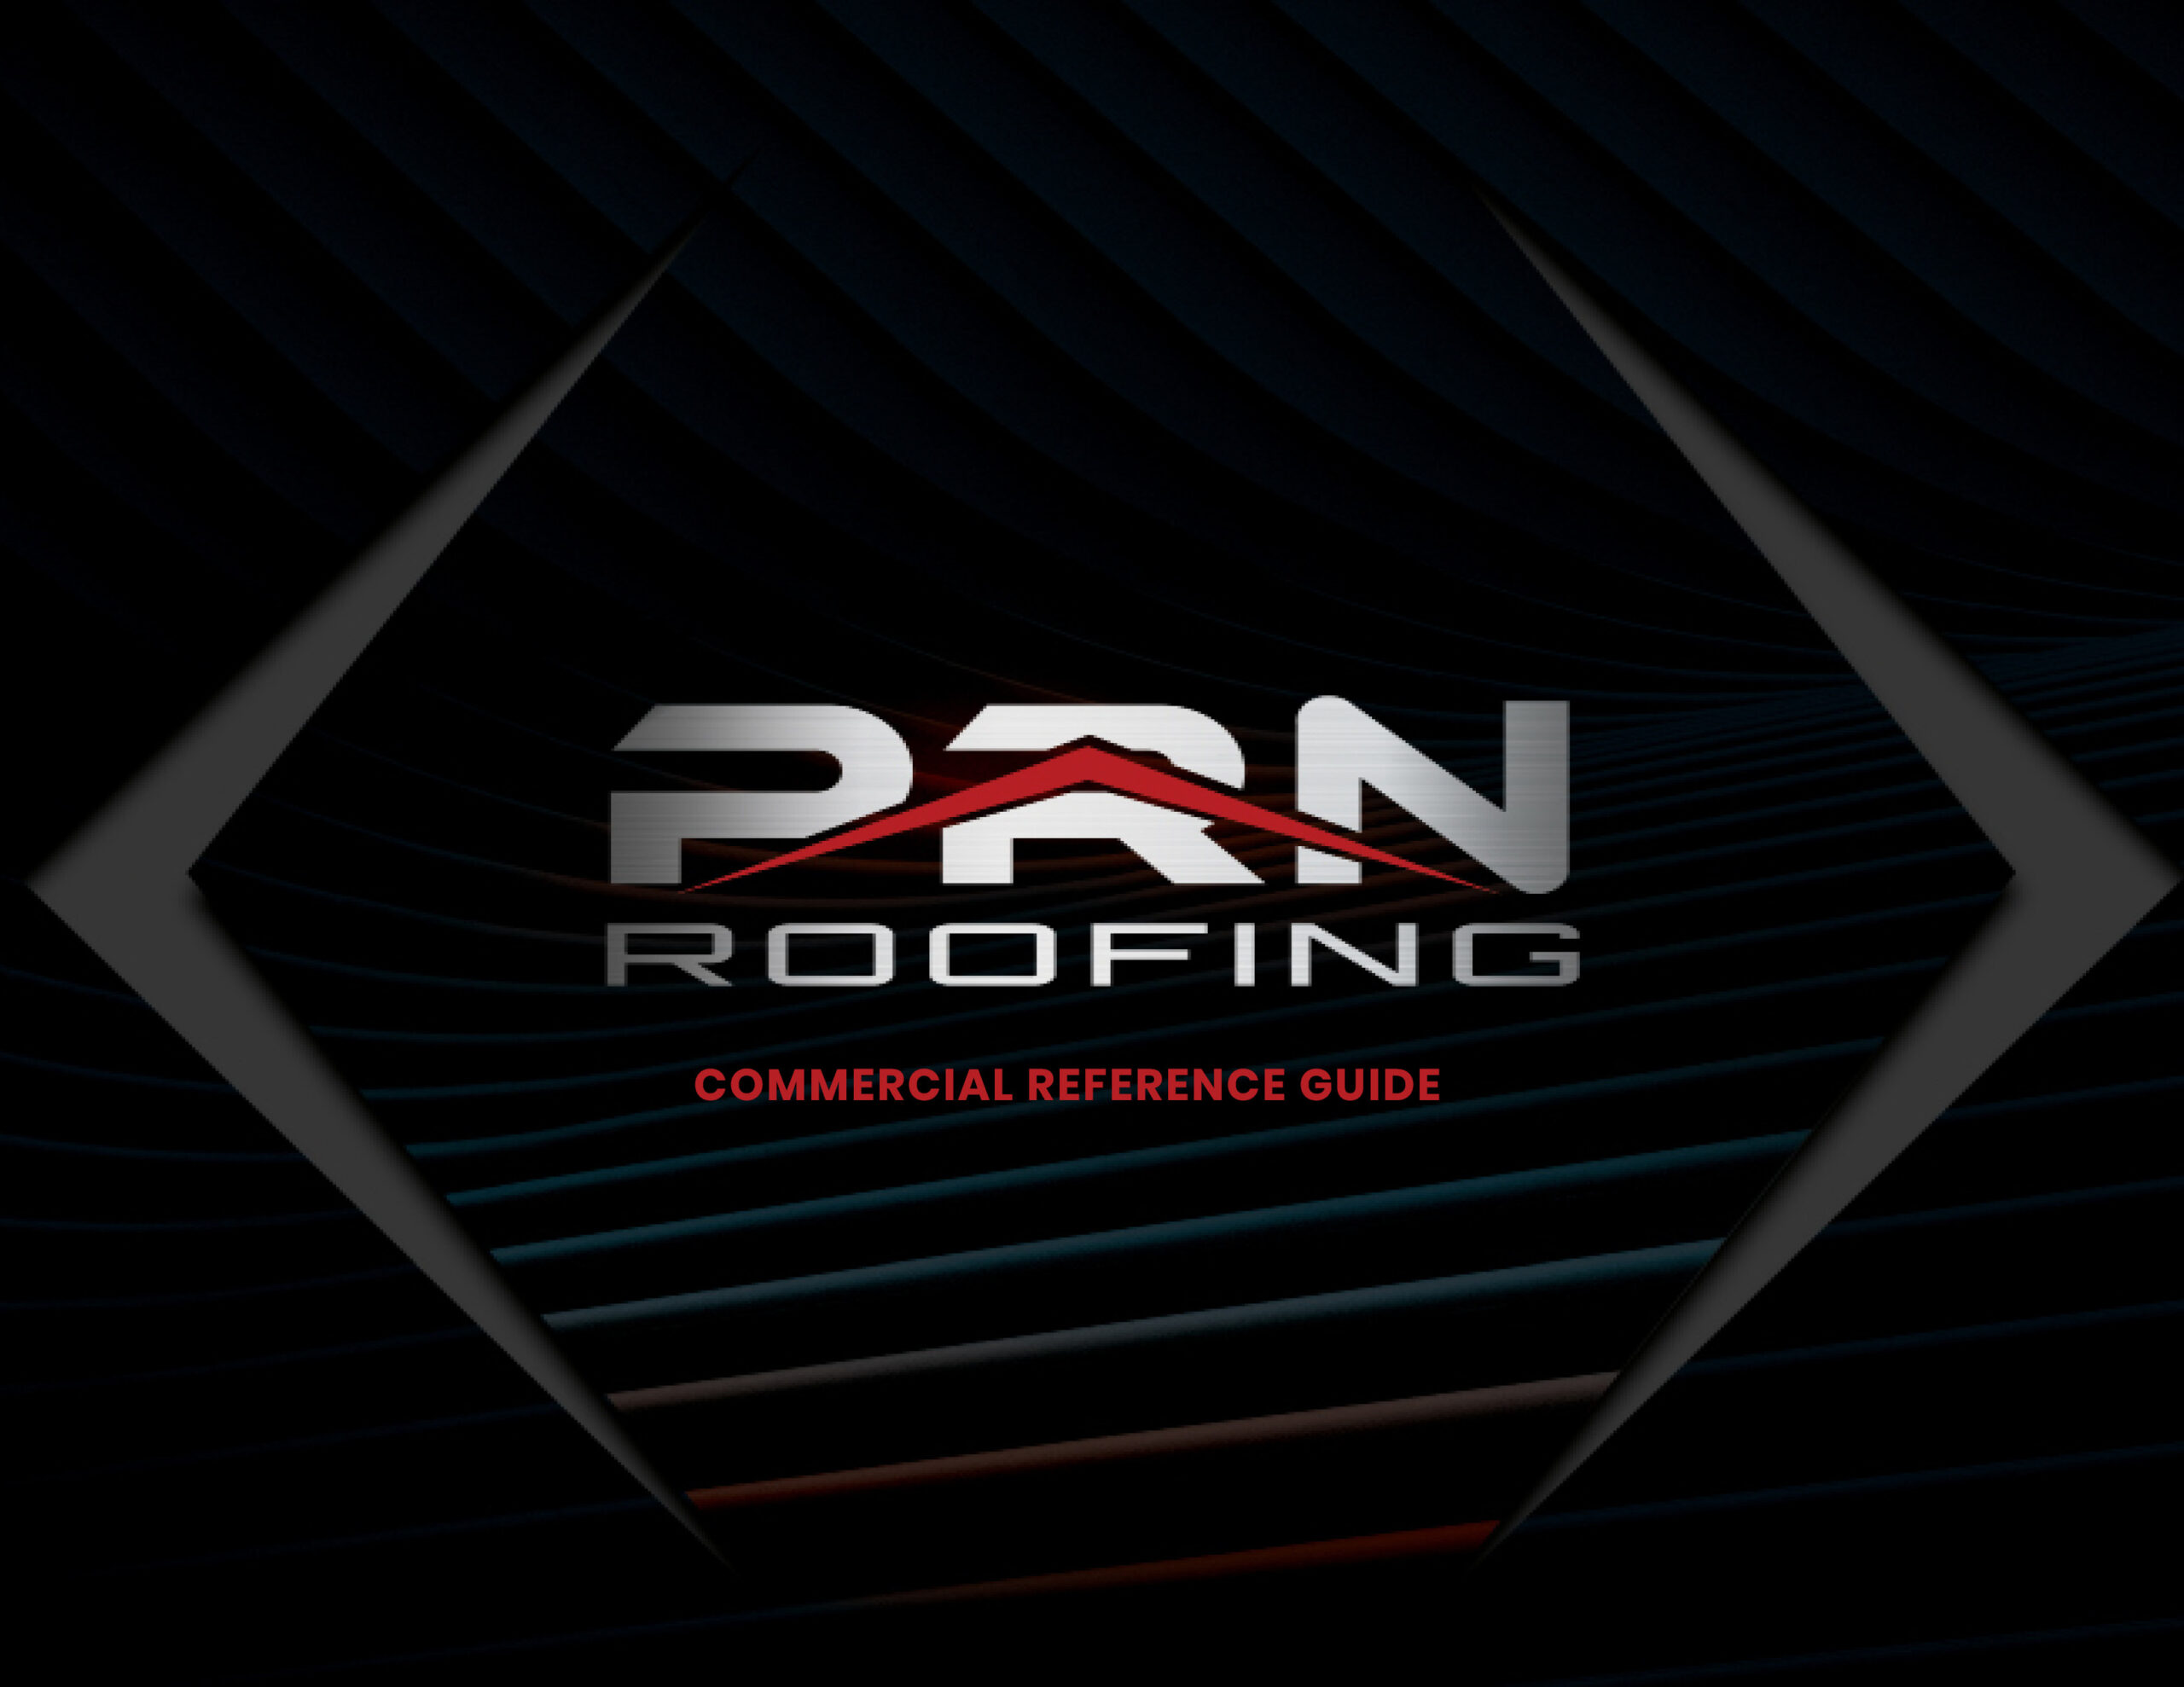 PRN-Roofing-Expo-Booklet-Edited-Ver2-5ed12eeb98585